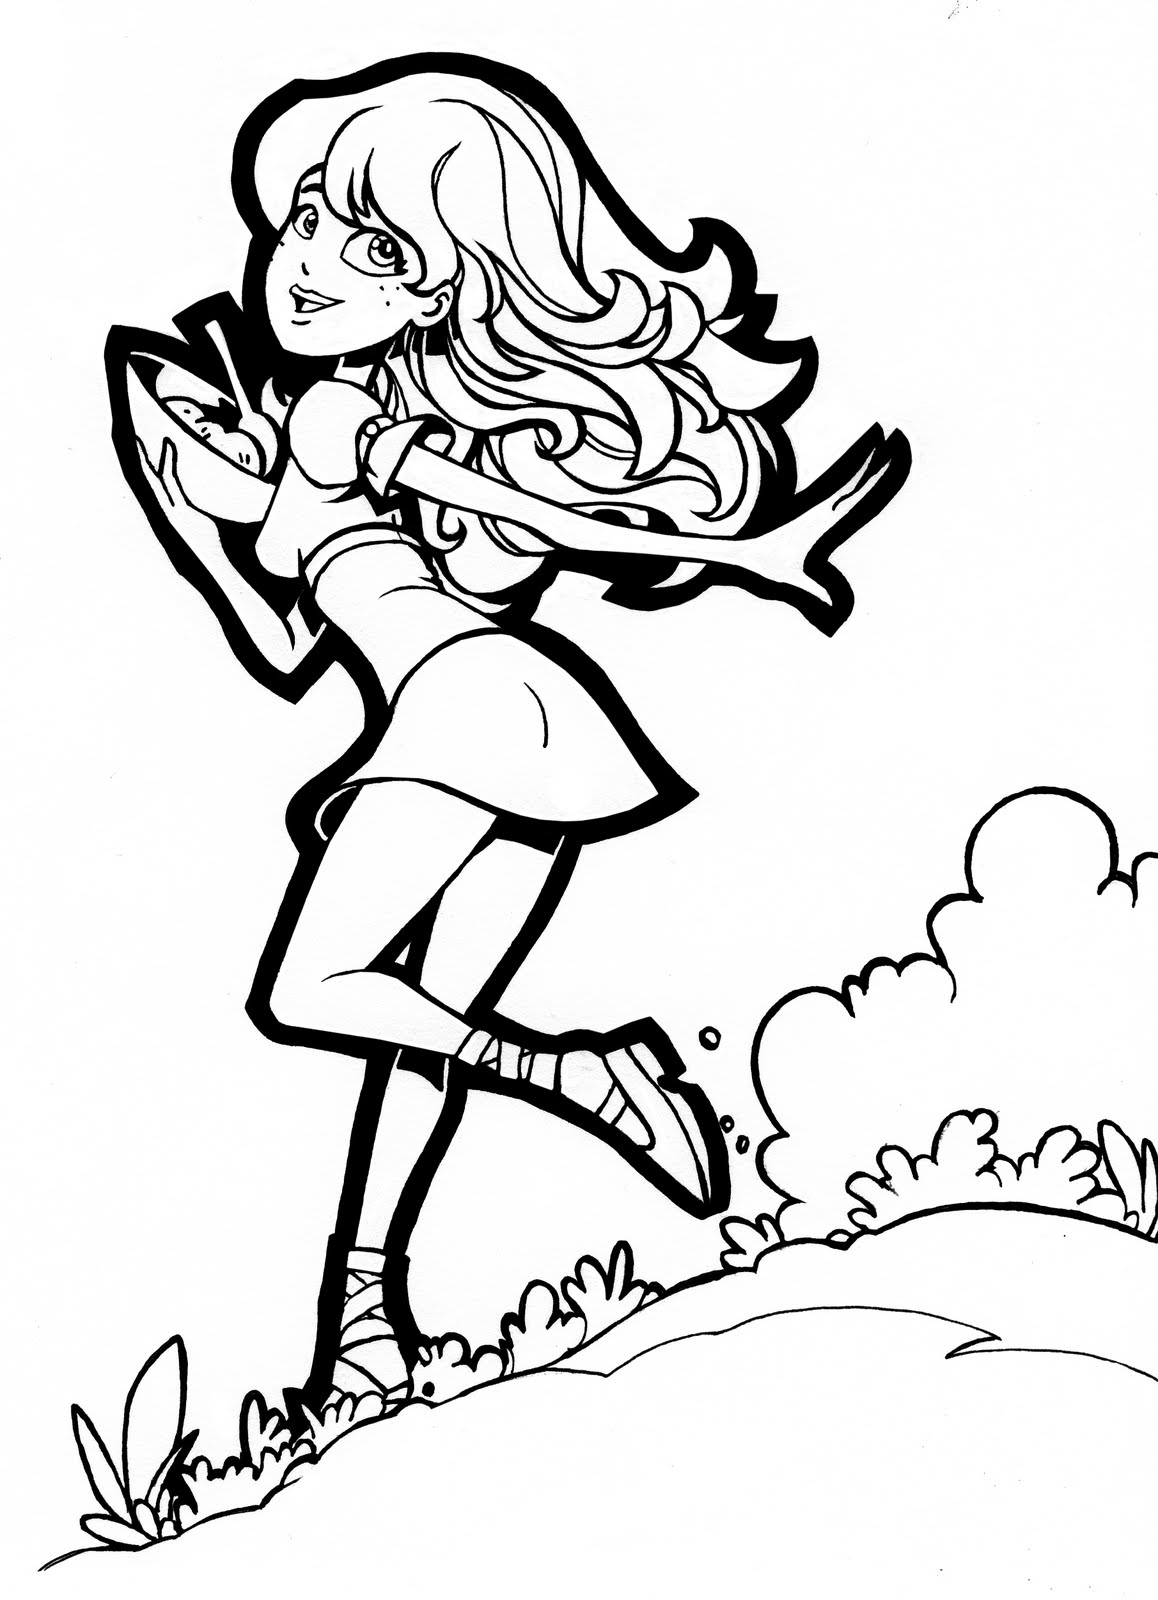 Goldilocks and the three bears coloring pages - Coloring Pages ...